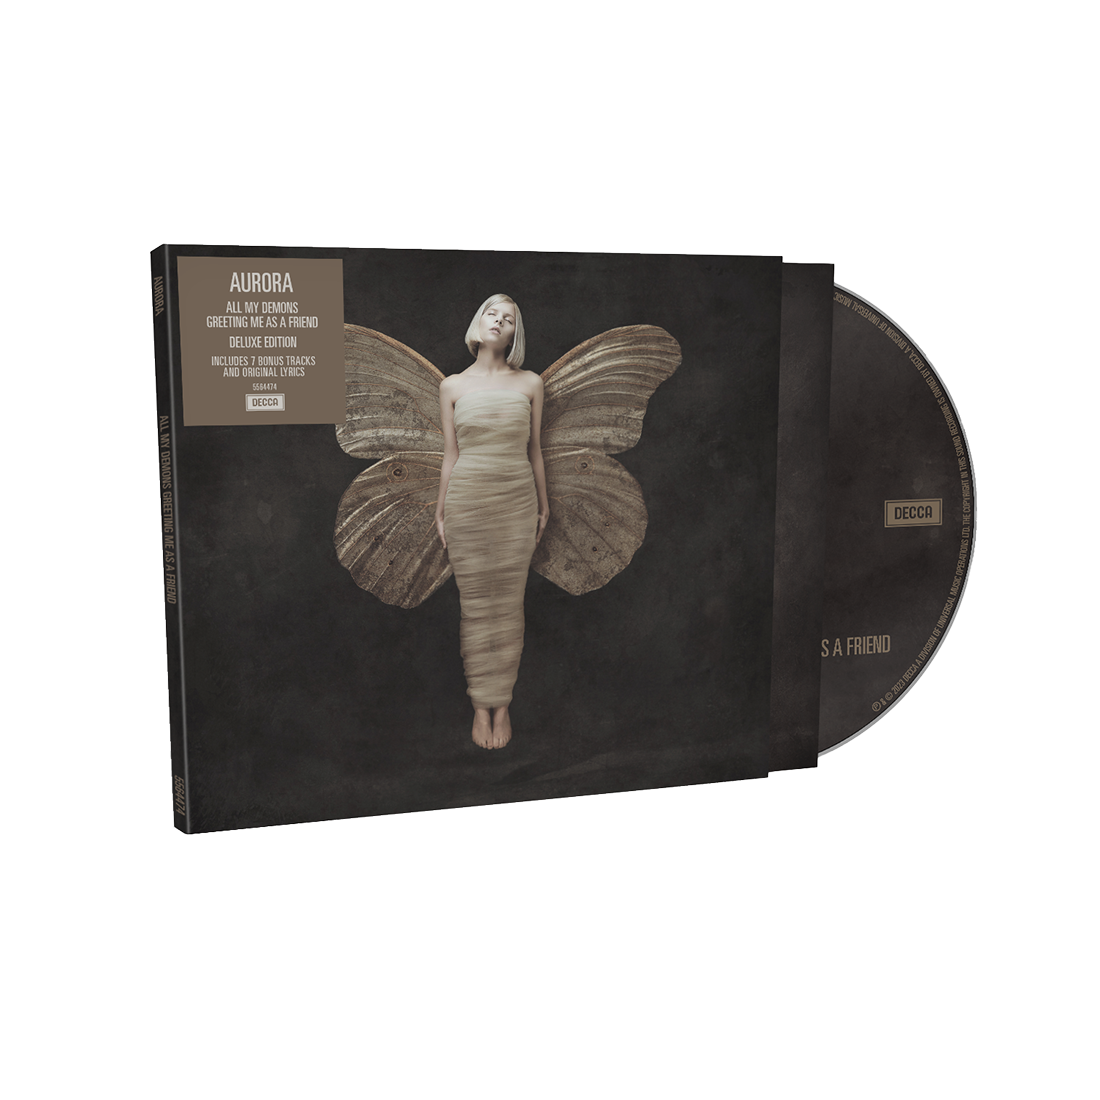 Aurora - All My Demons Greeting Me As A Friend: Deluxe CD